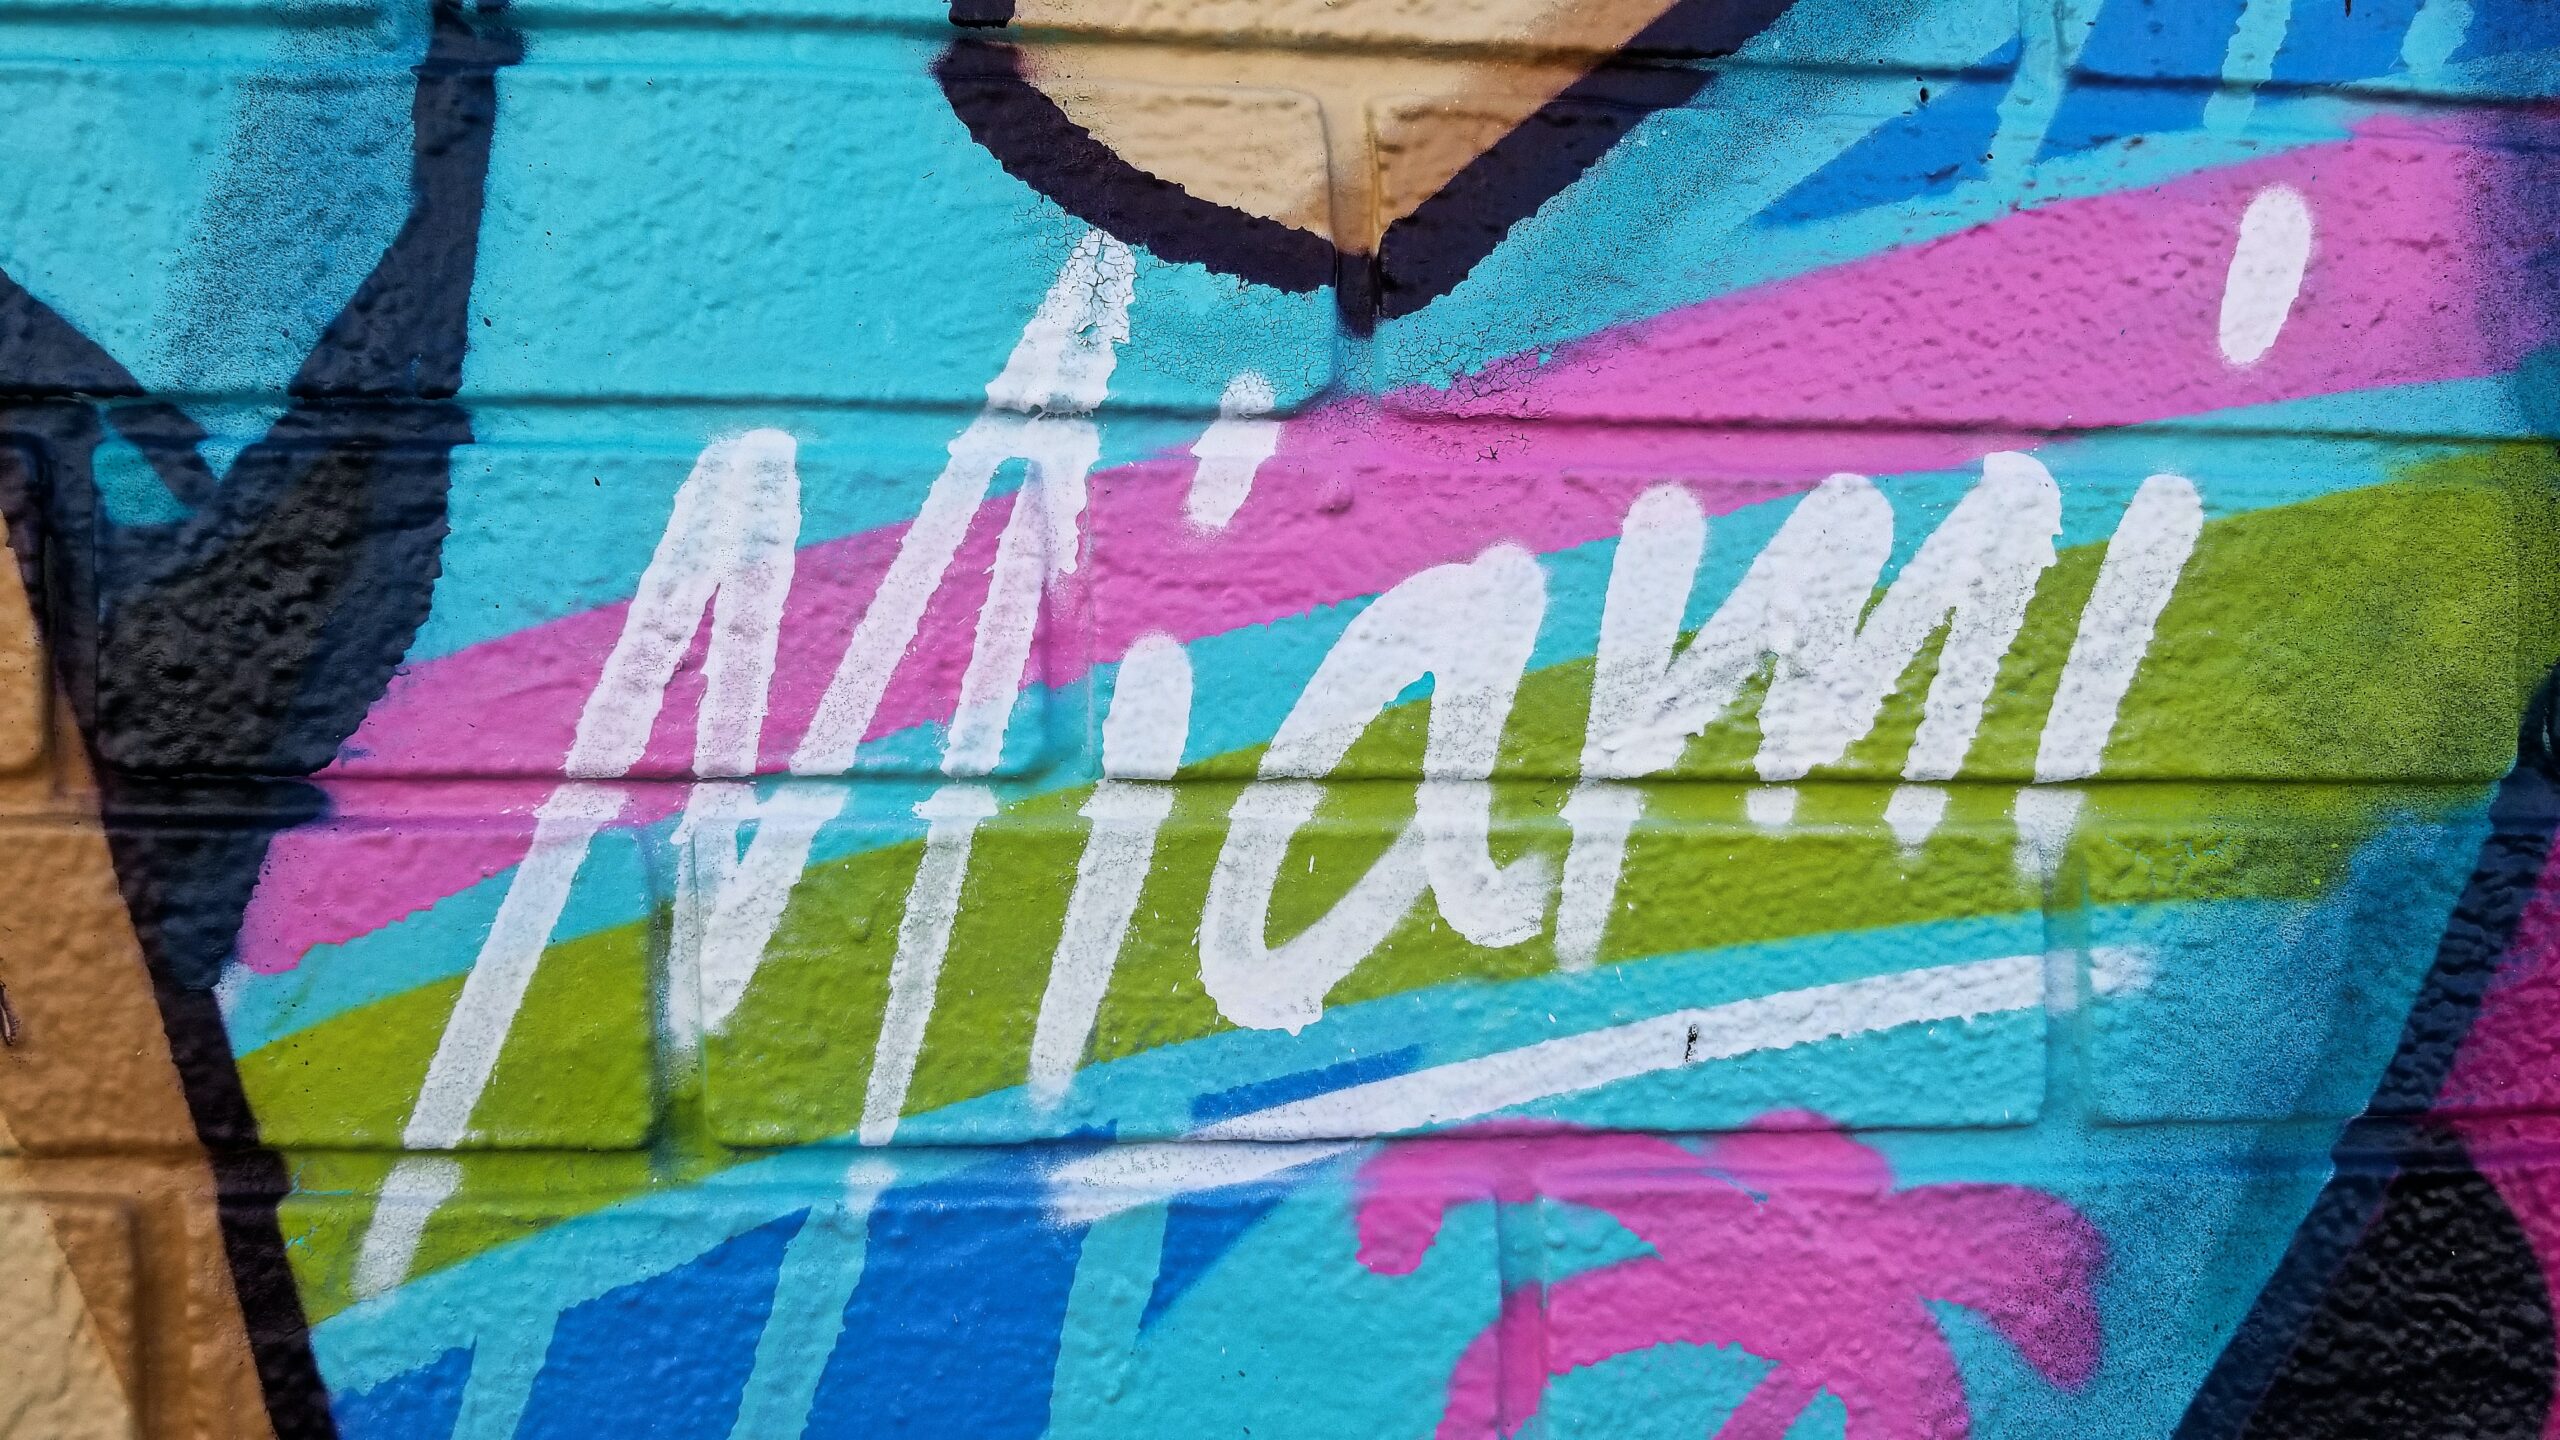 Top 10 Things to do in Miami